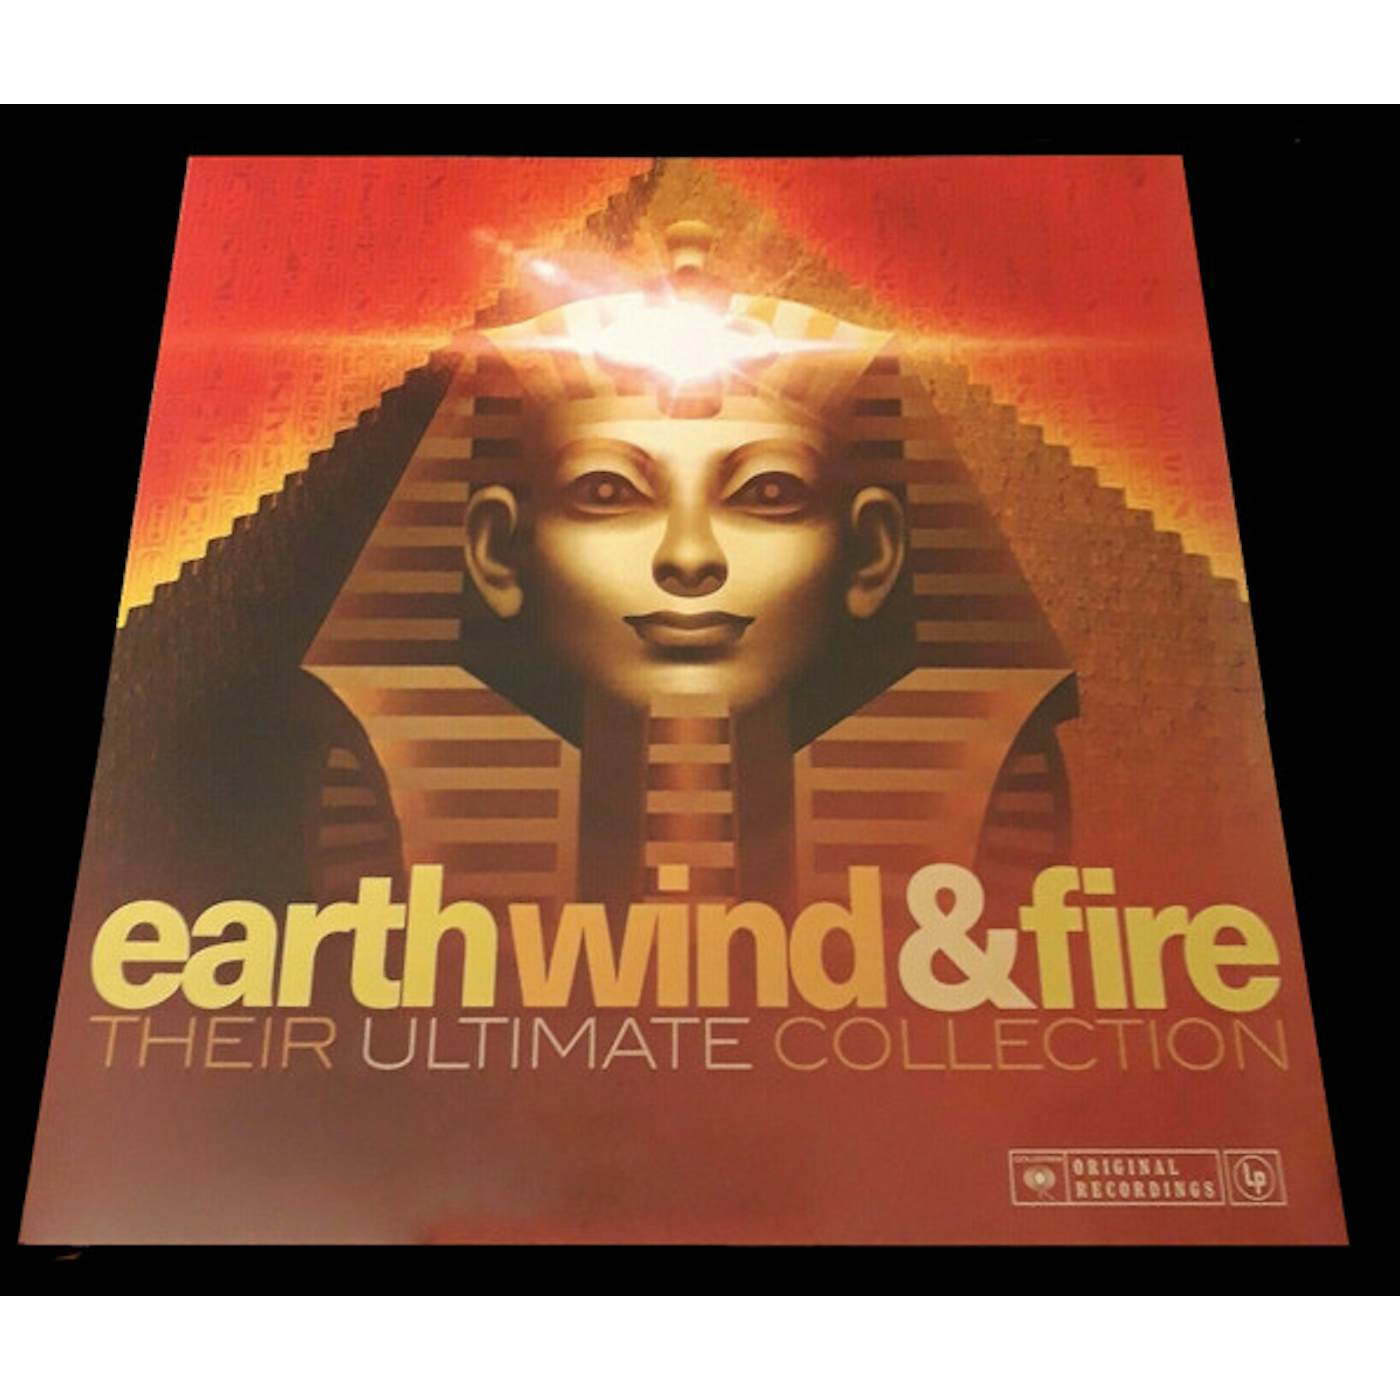 Earth, Wind & Fire THEIR ULTIMATE COLLECTION Vinyl Record